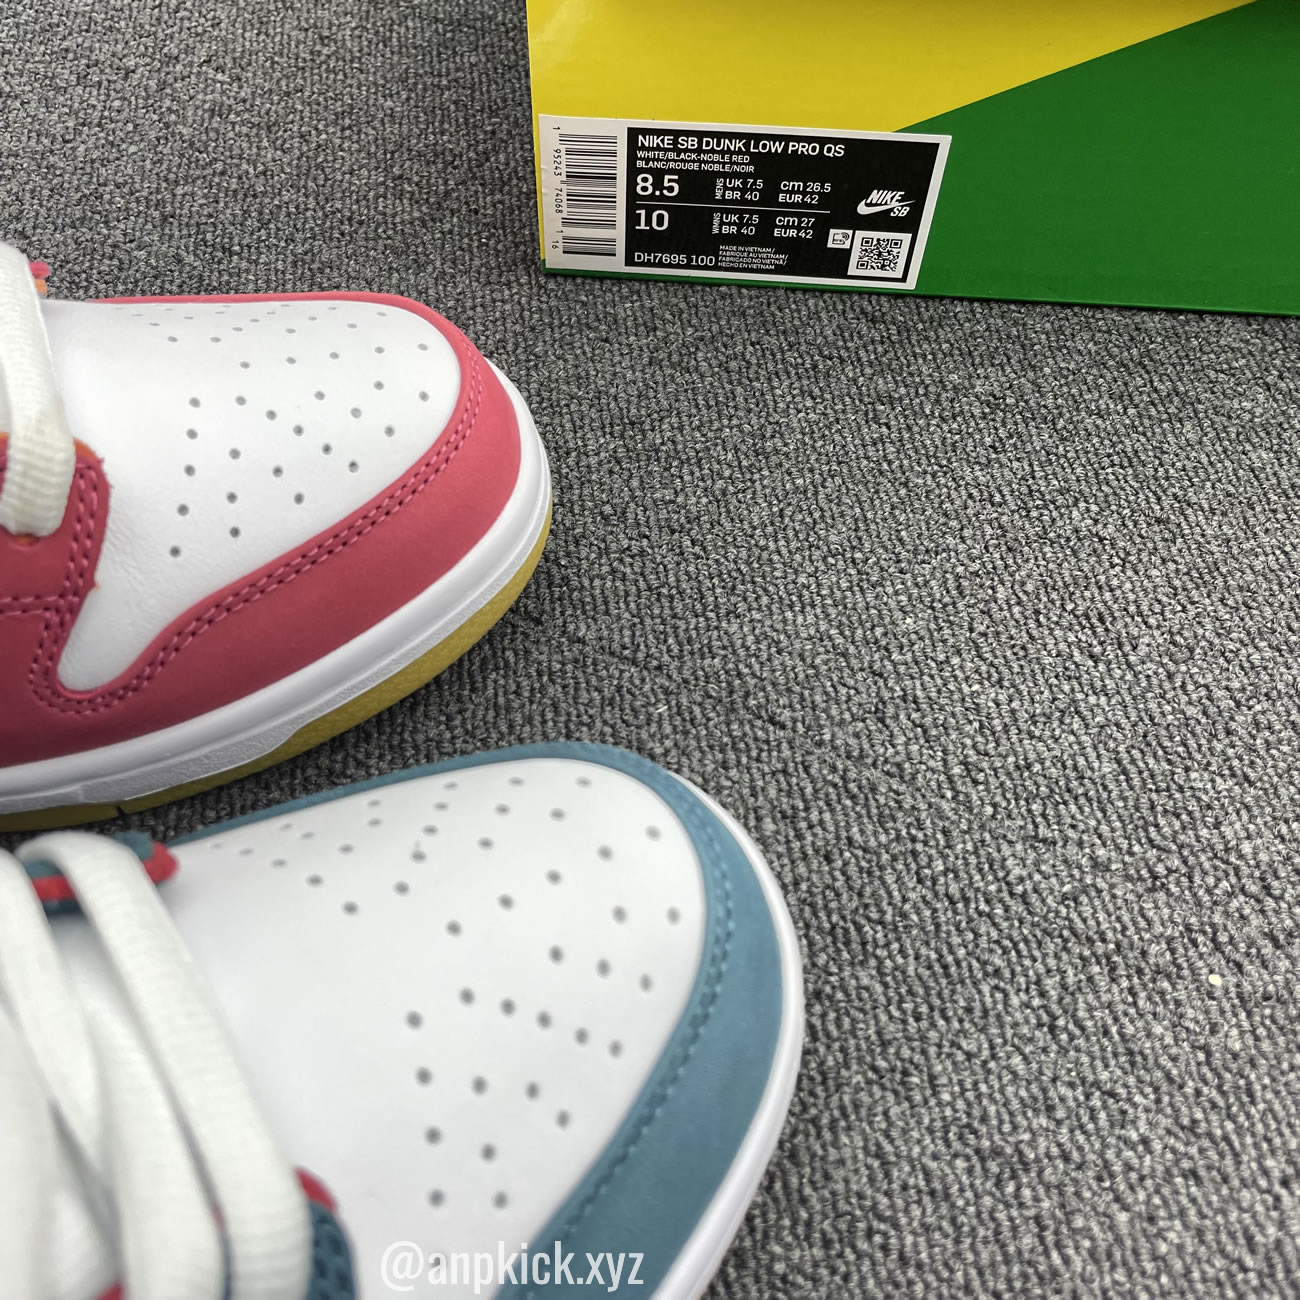 Parra Nike Sb Dunk Low Collab Summer 2021 Colorway Surfaces Dh7695 100 (10) - newkick.org